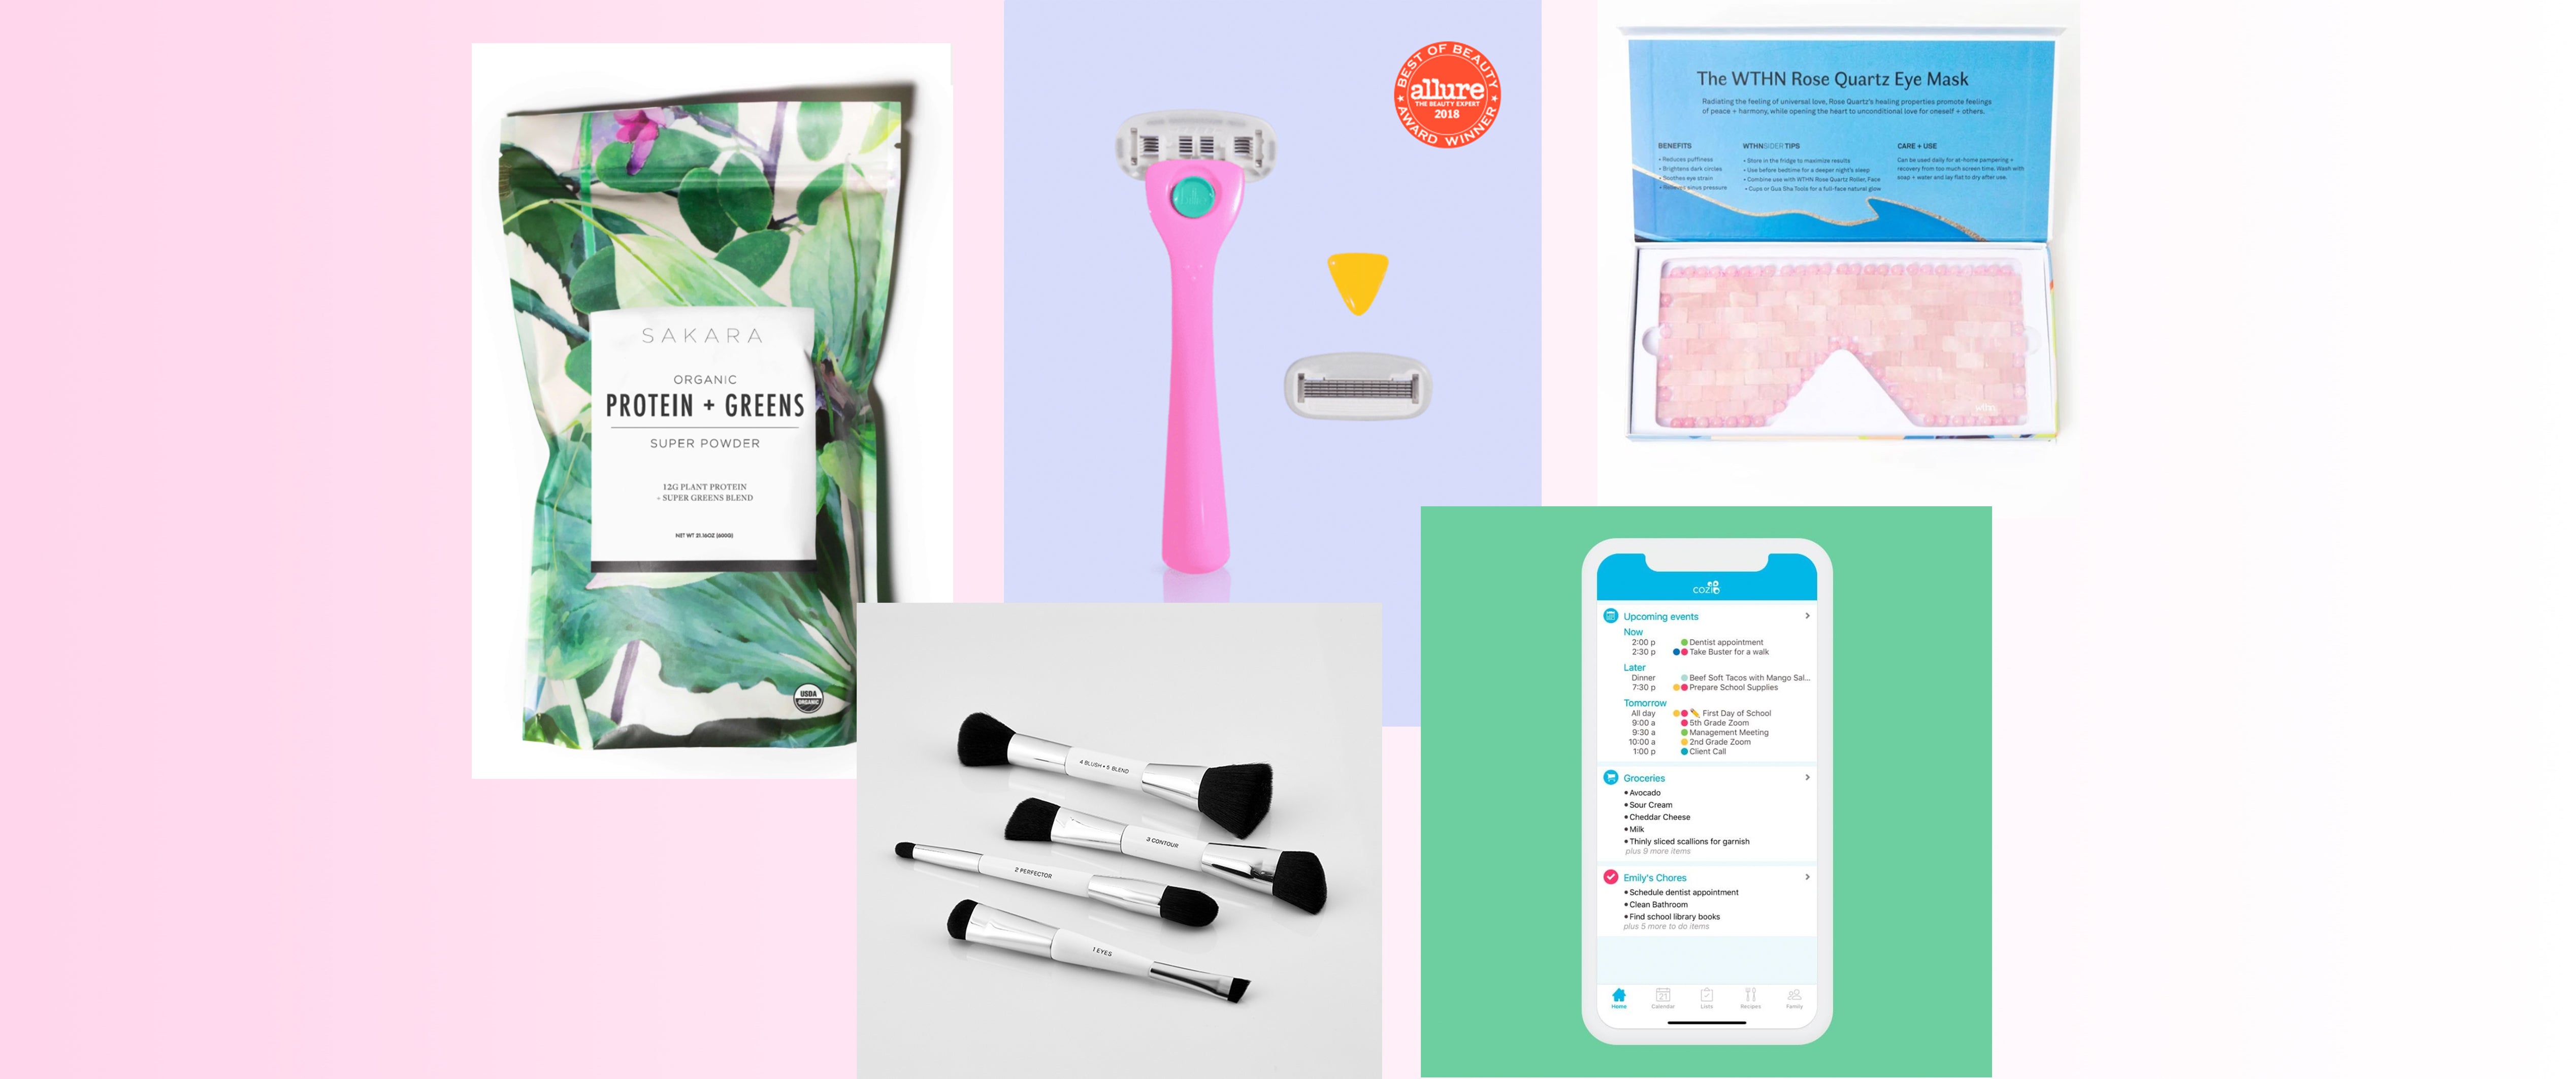 Collage of products: Protein powder, razor, eye mask, essential makeup brushes, and mobile app